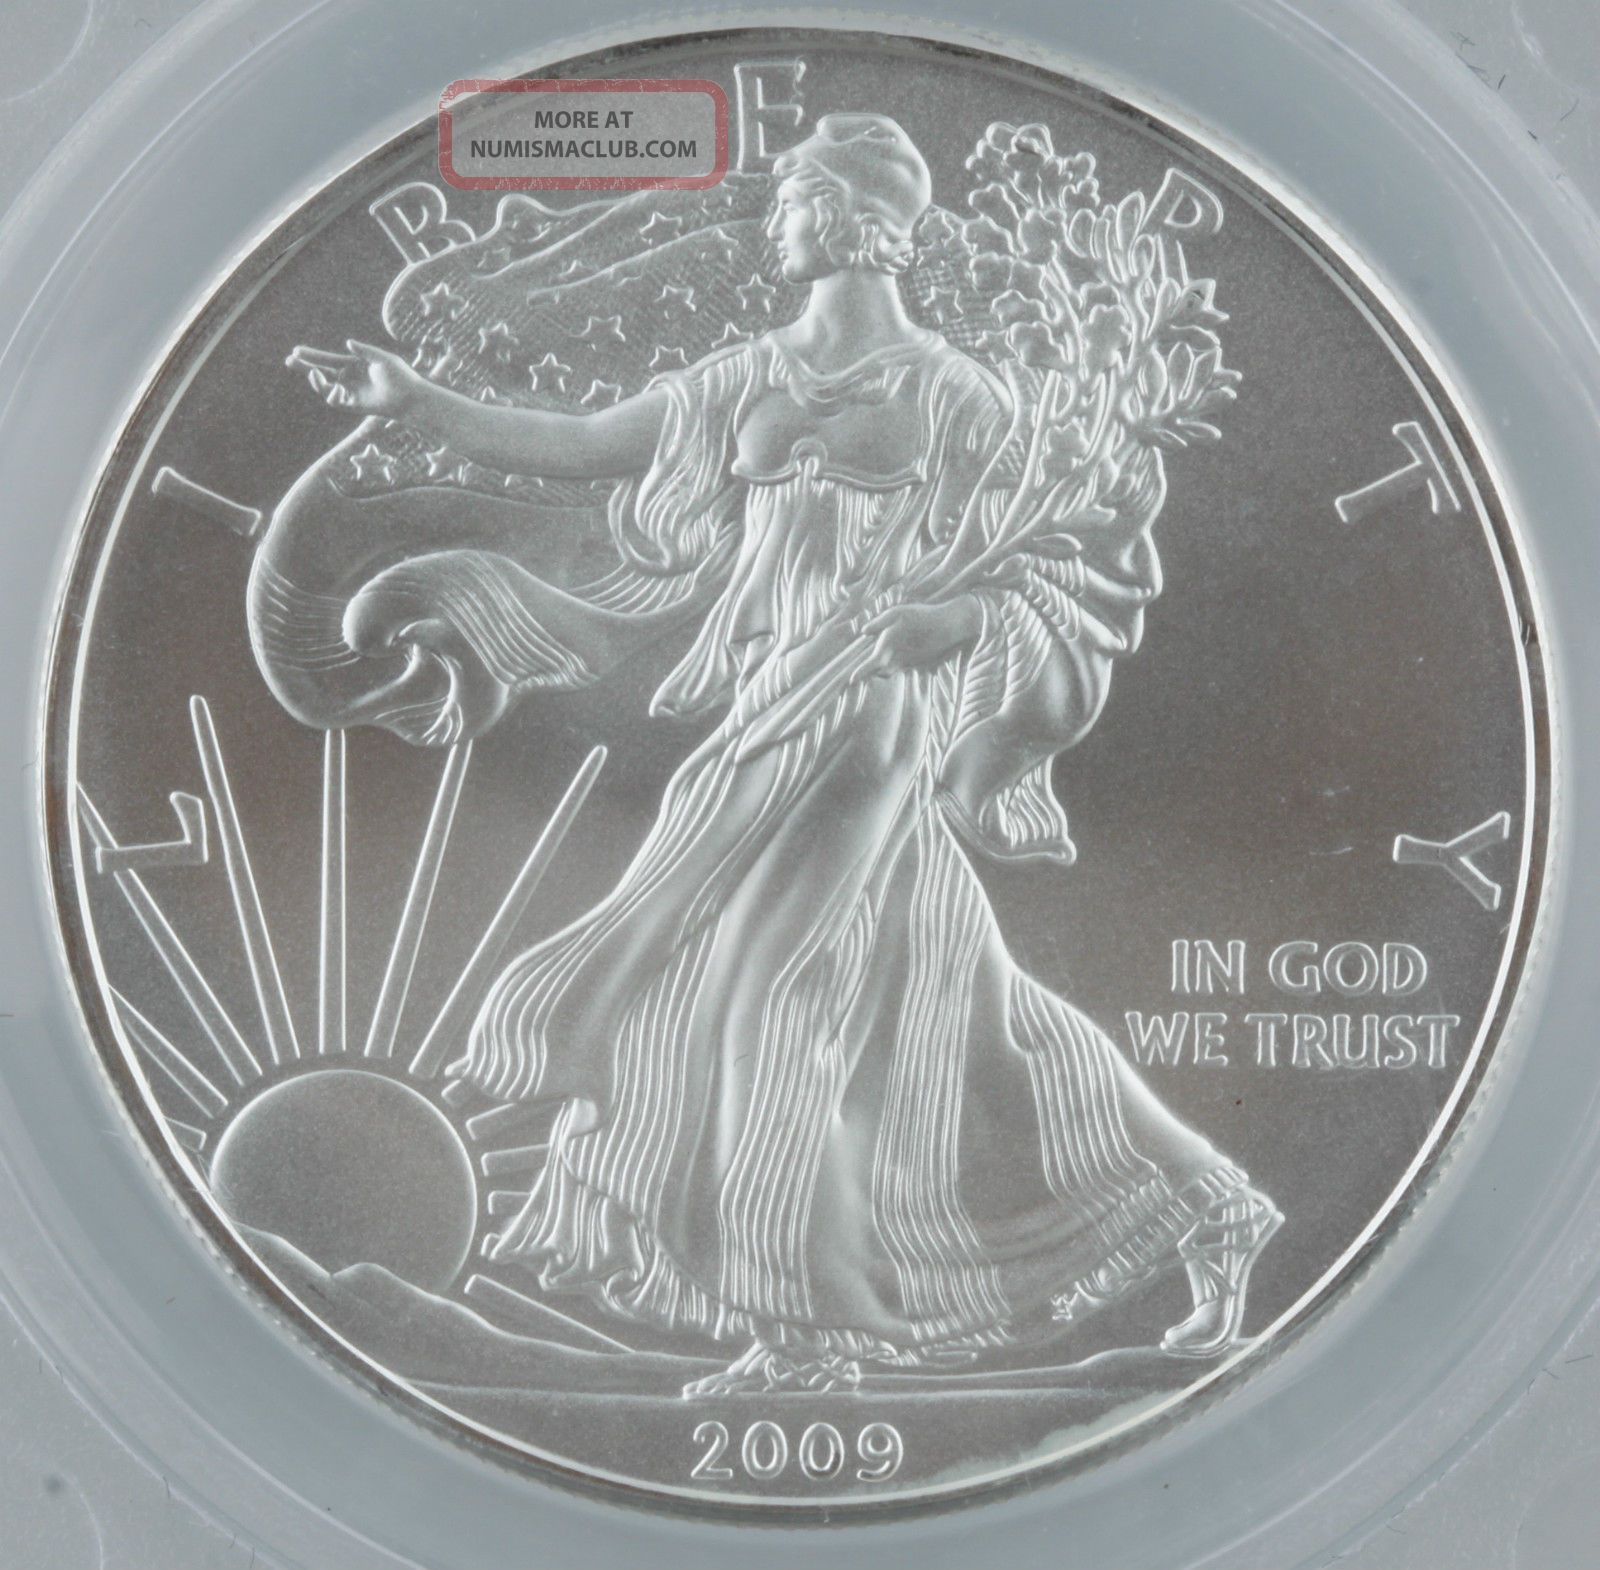 Graded silver coins